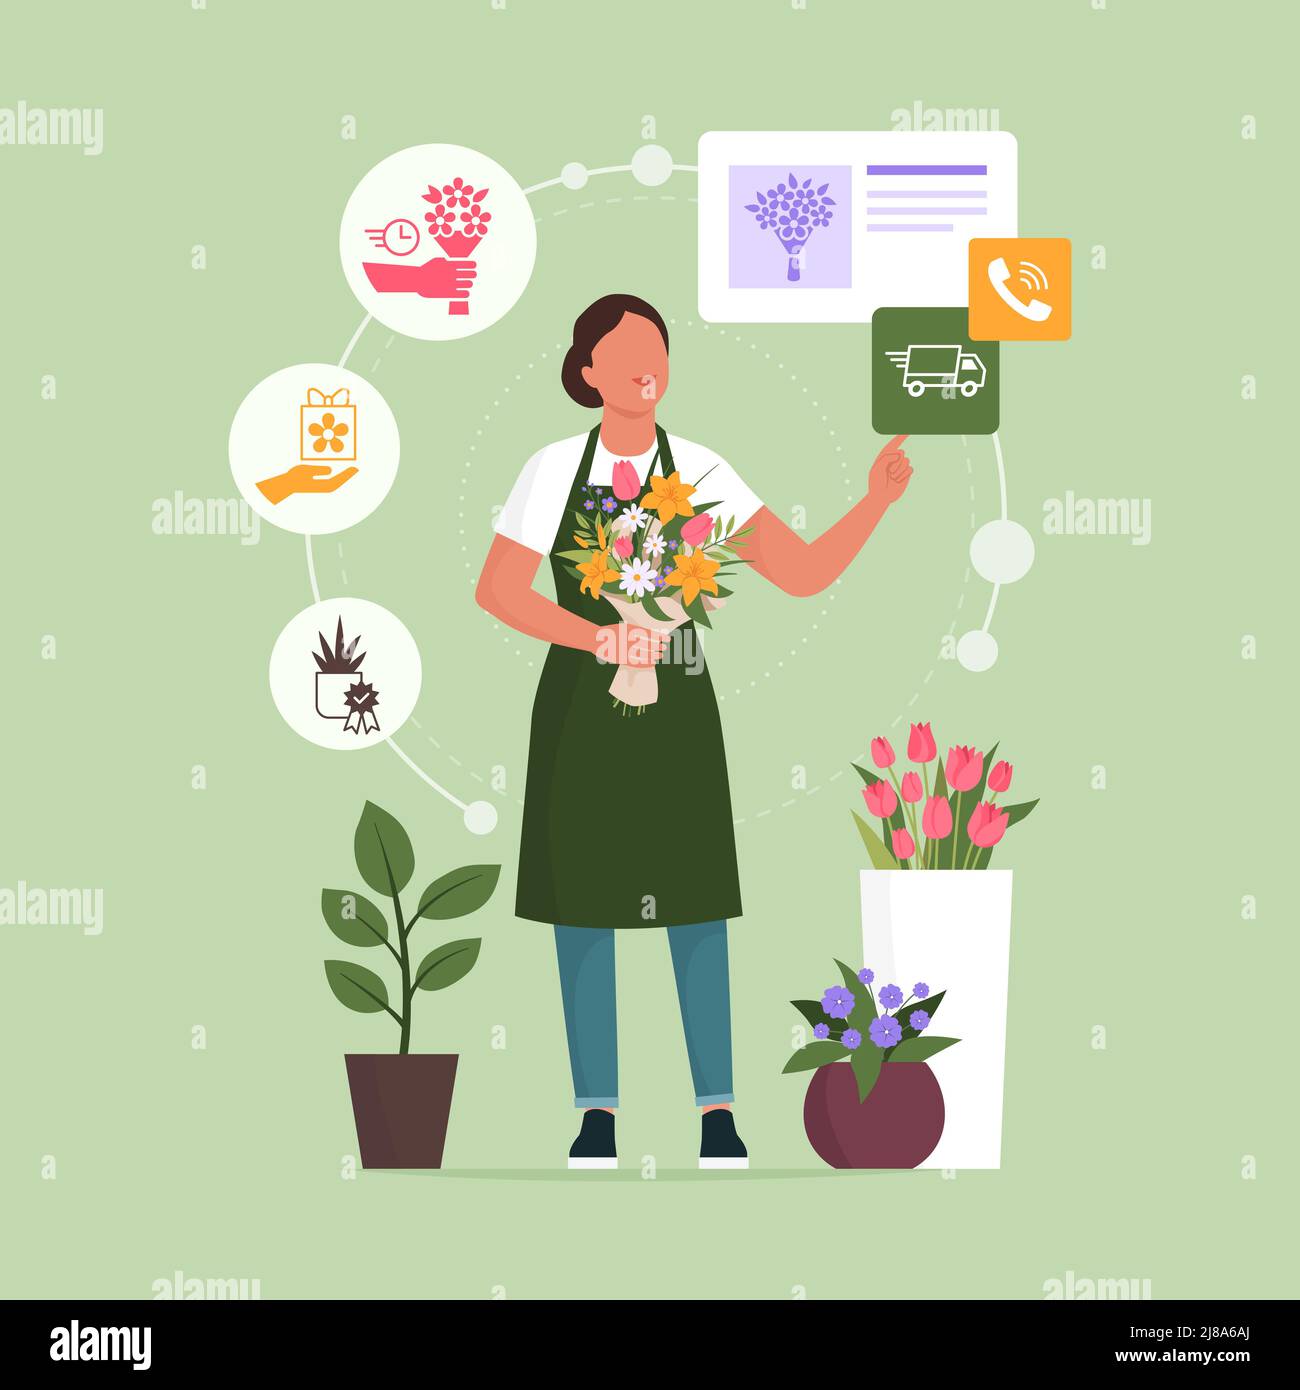 Professional florist taking orders online, she is holding a beautiful flower bouquet and interacting with a user interface Stock Vector